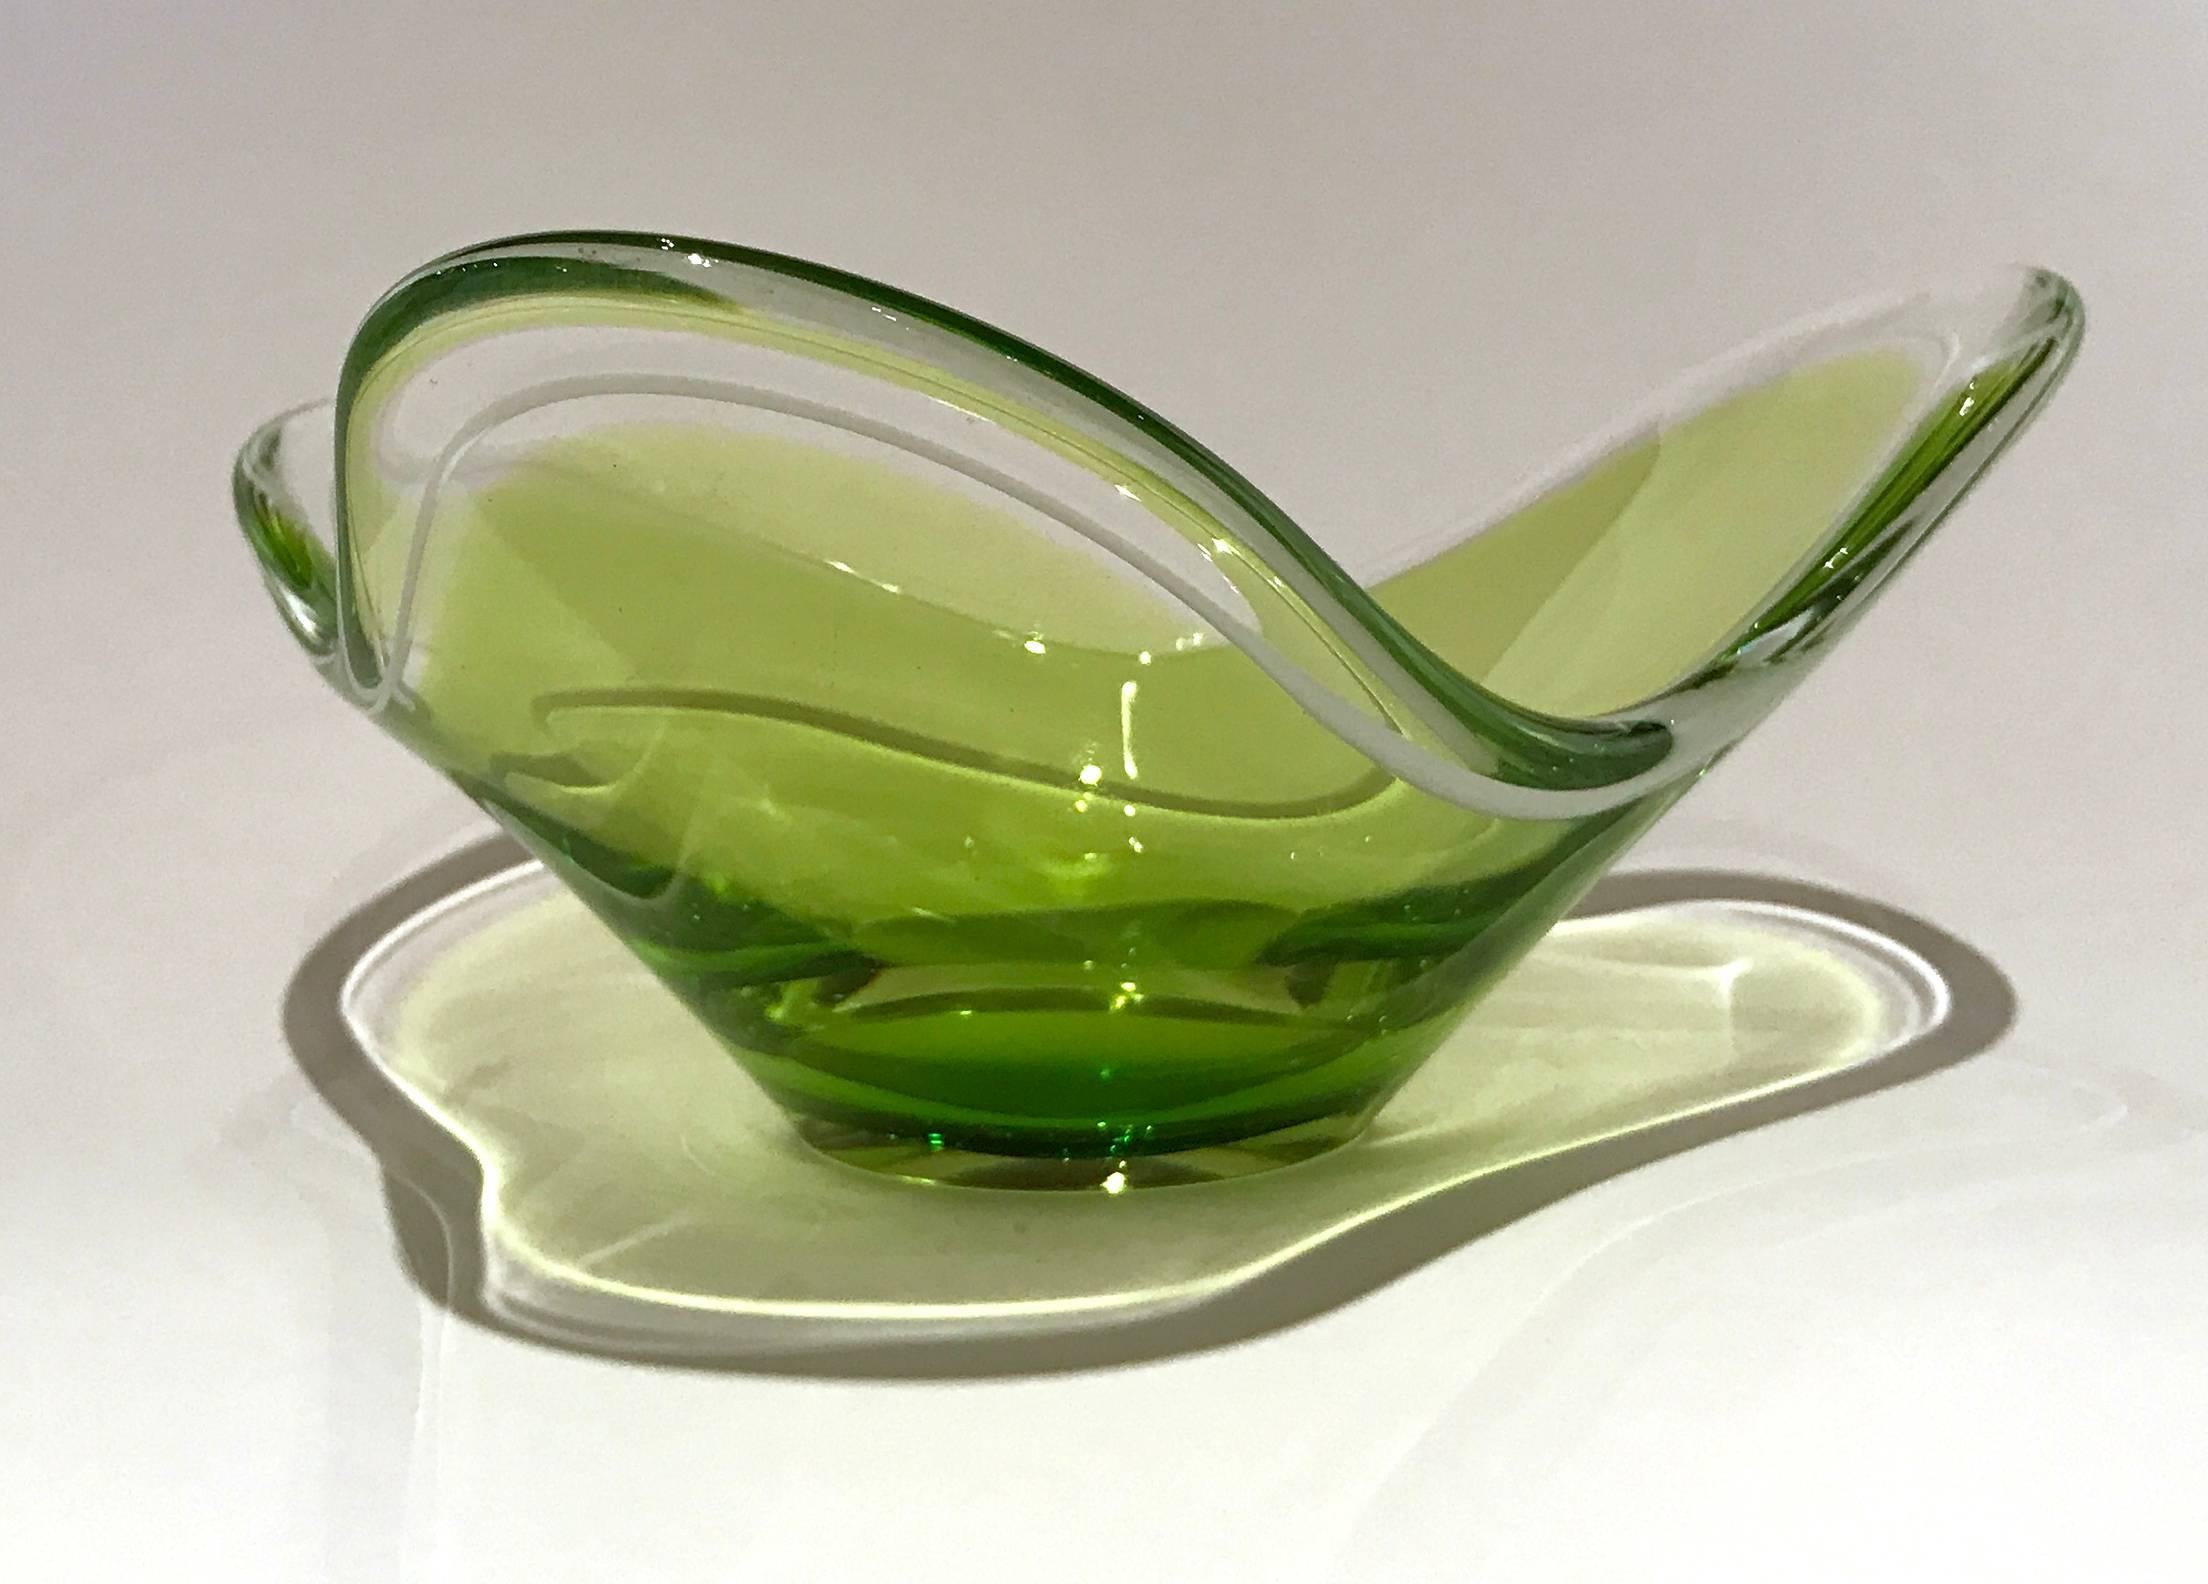 Two Matching Glass Bowls by Paul Kedelv for Flygsfors, 1955 In Excellent Condition For Sale In Dallas, TX